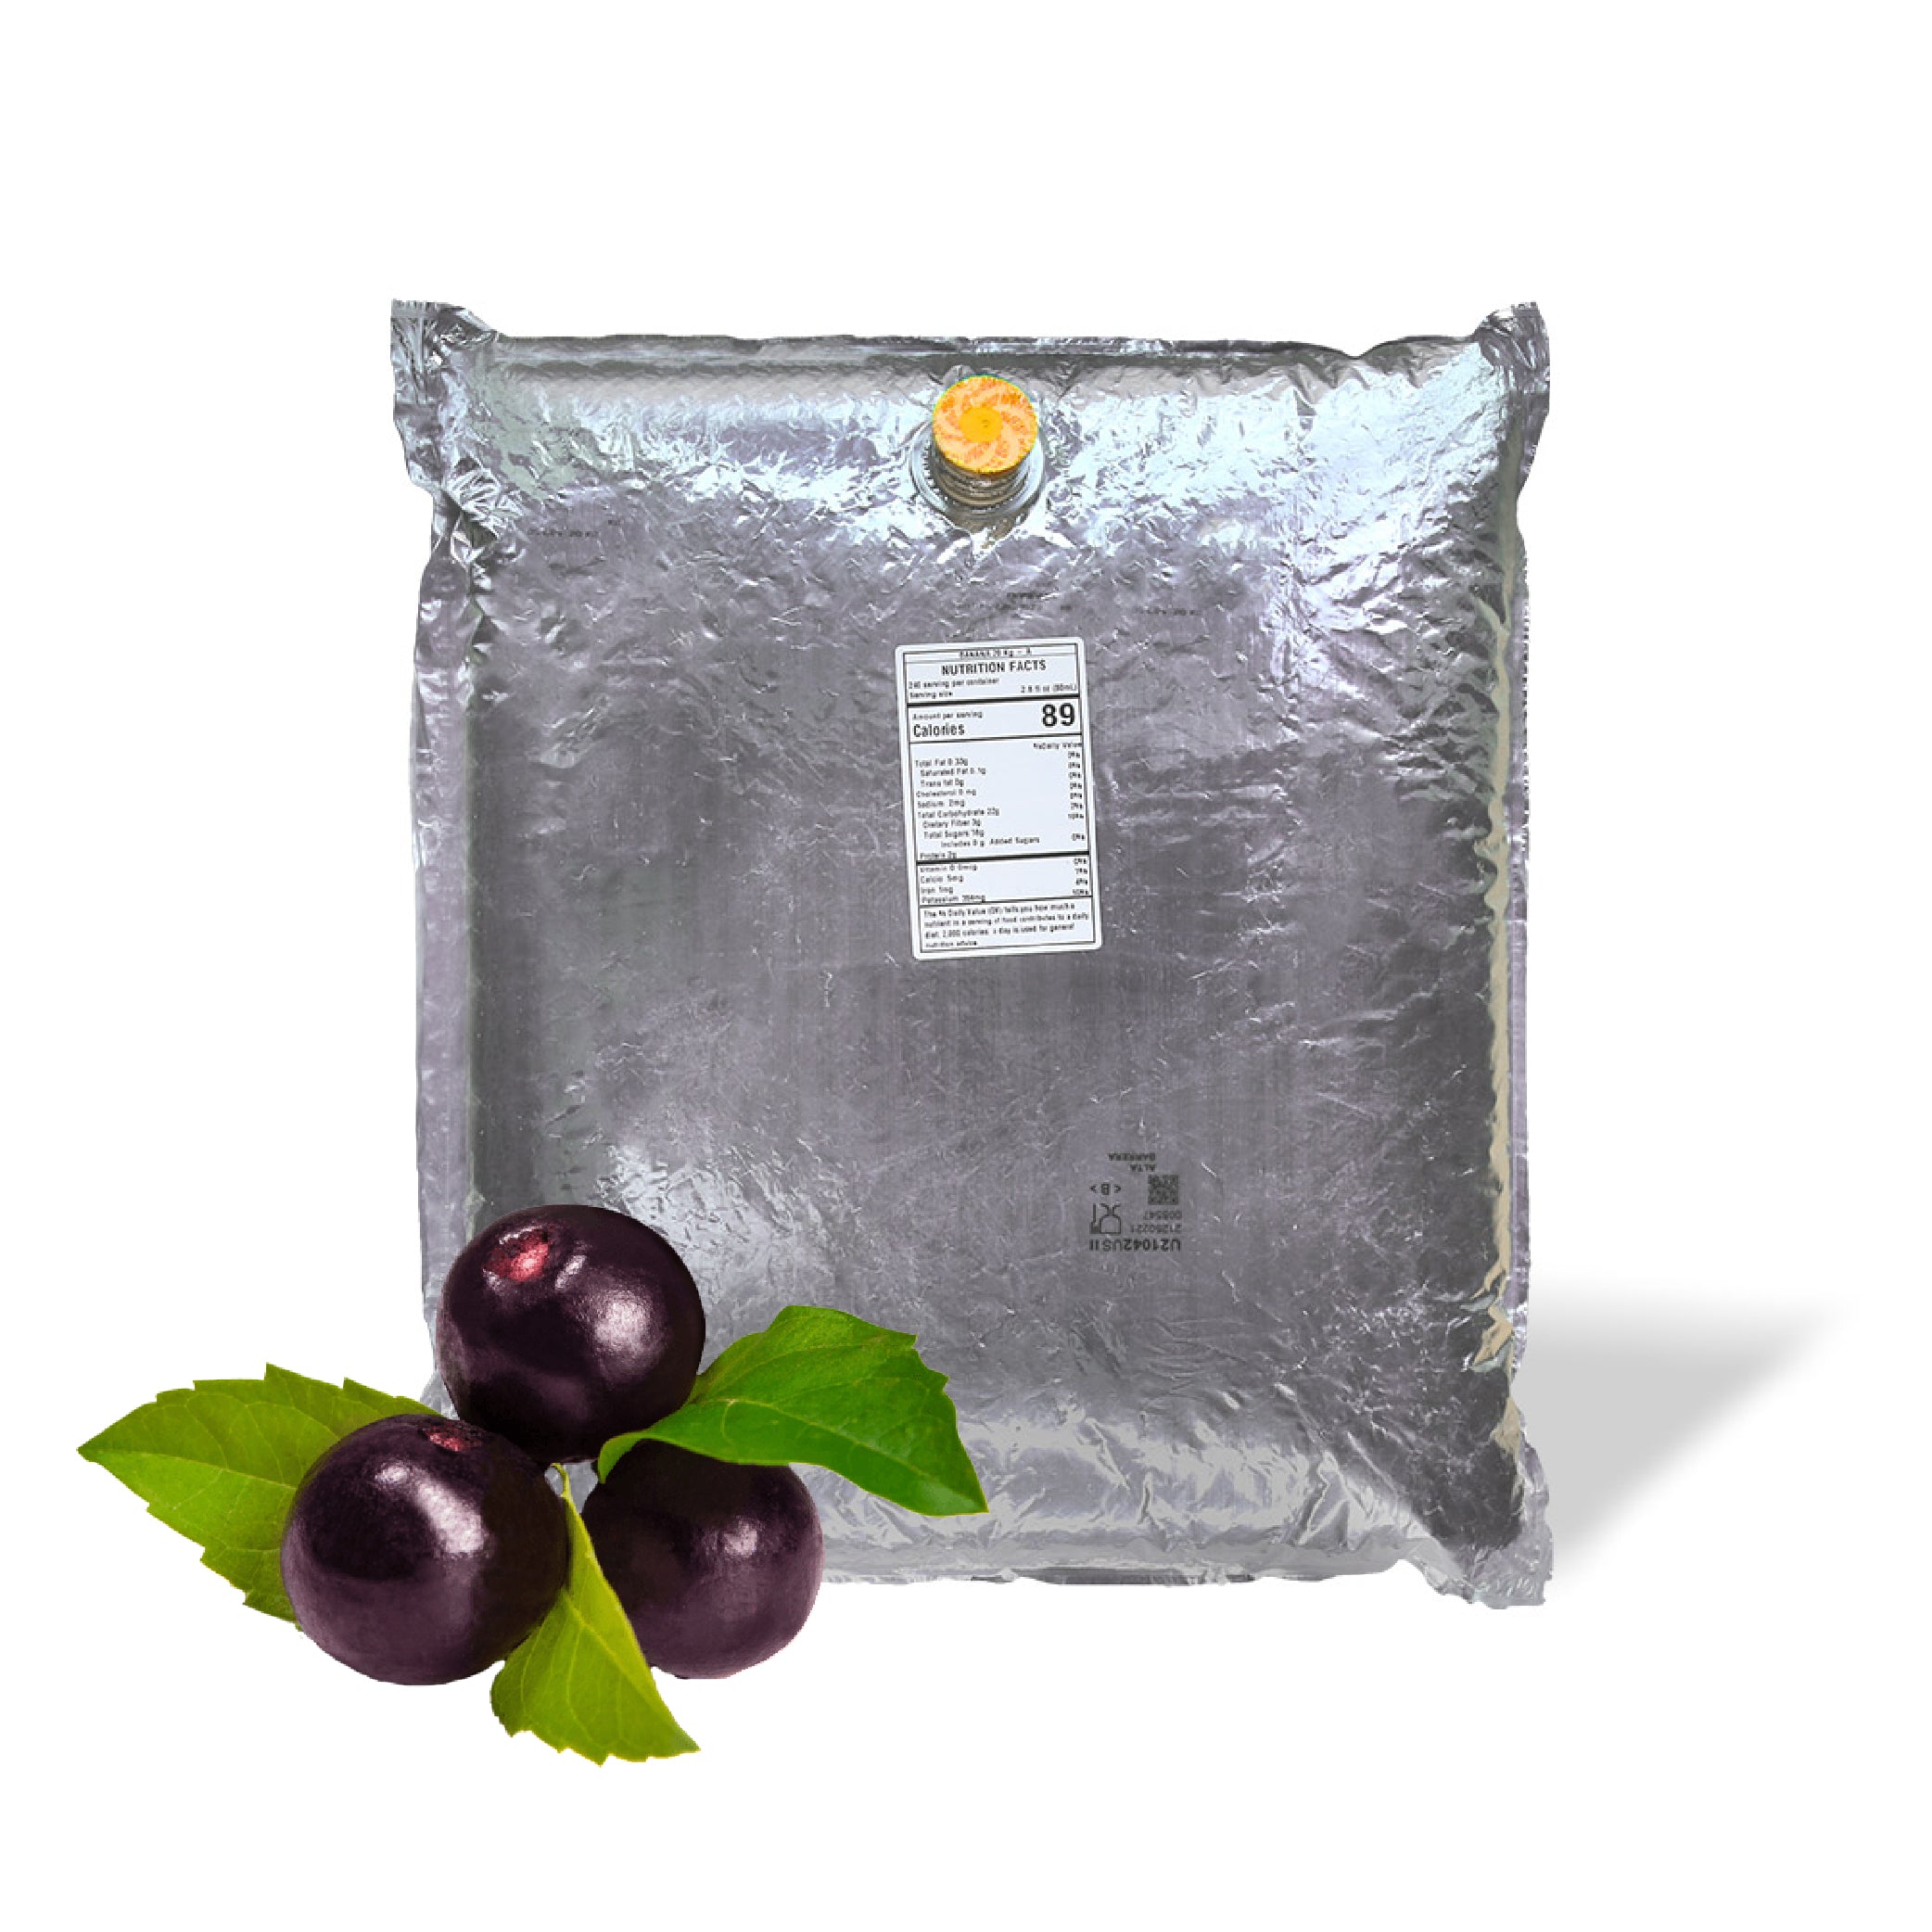 Acai Berry Aseptic Fruit Purée Bag - Fresh non-GMO acai berries in a convenient, no sugar added puree, perfect for breweries and fruit puree industry applications.